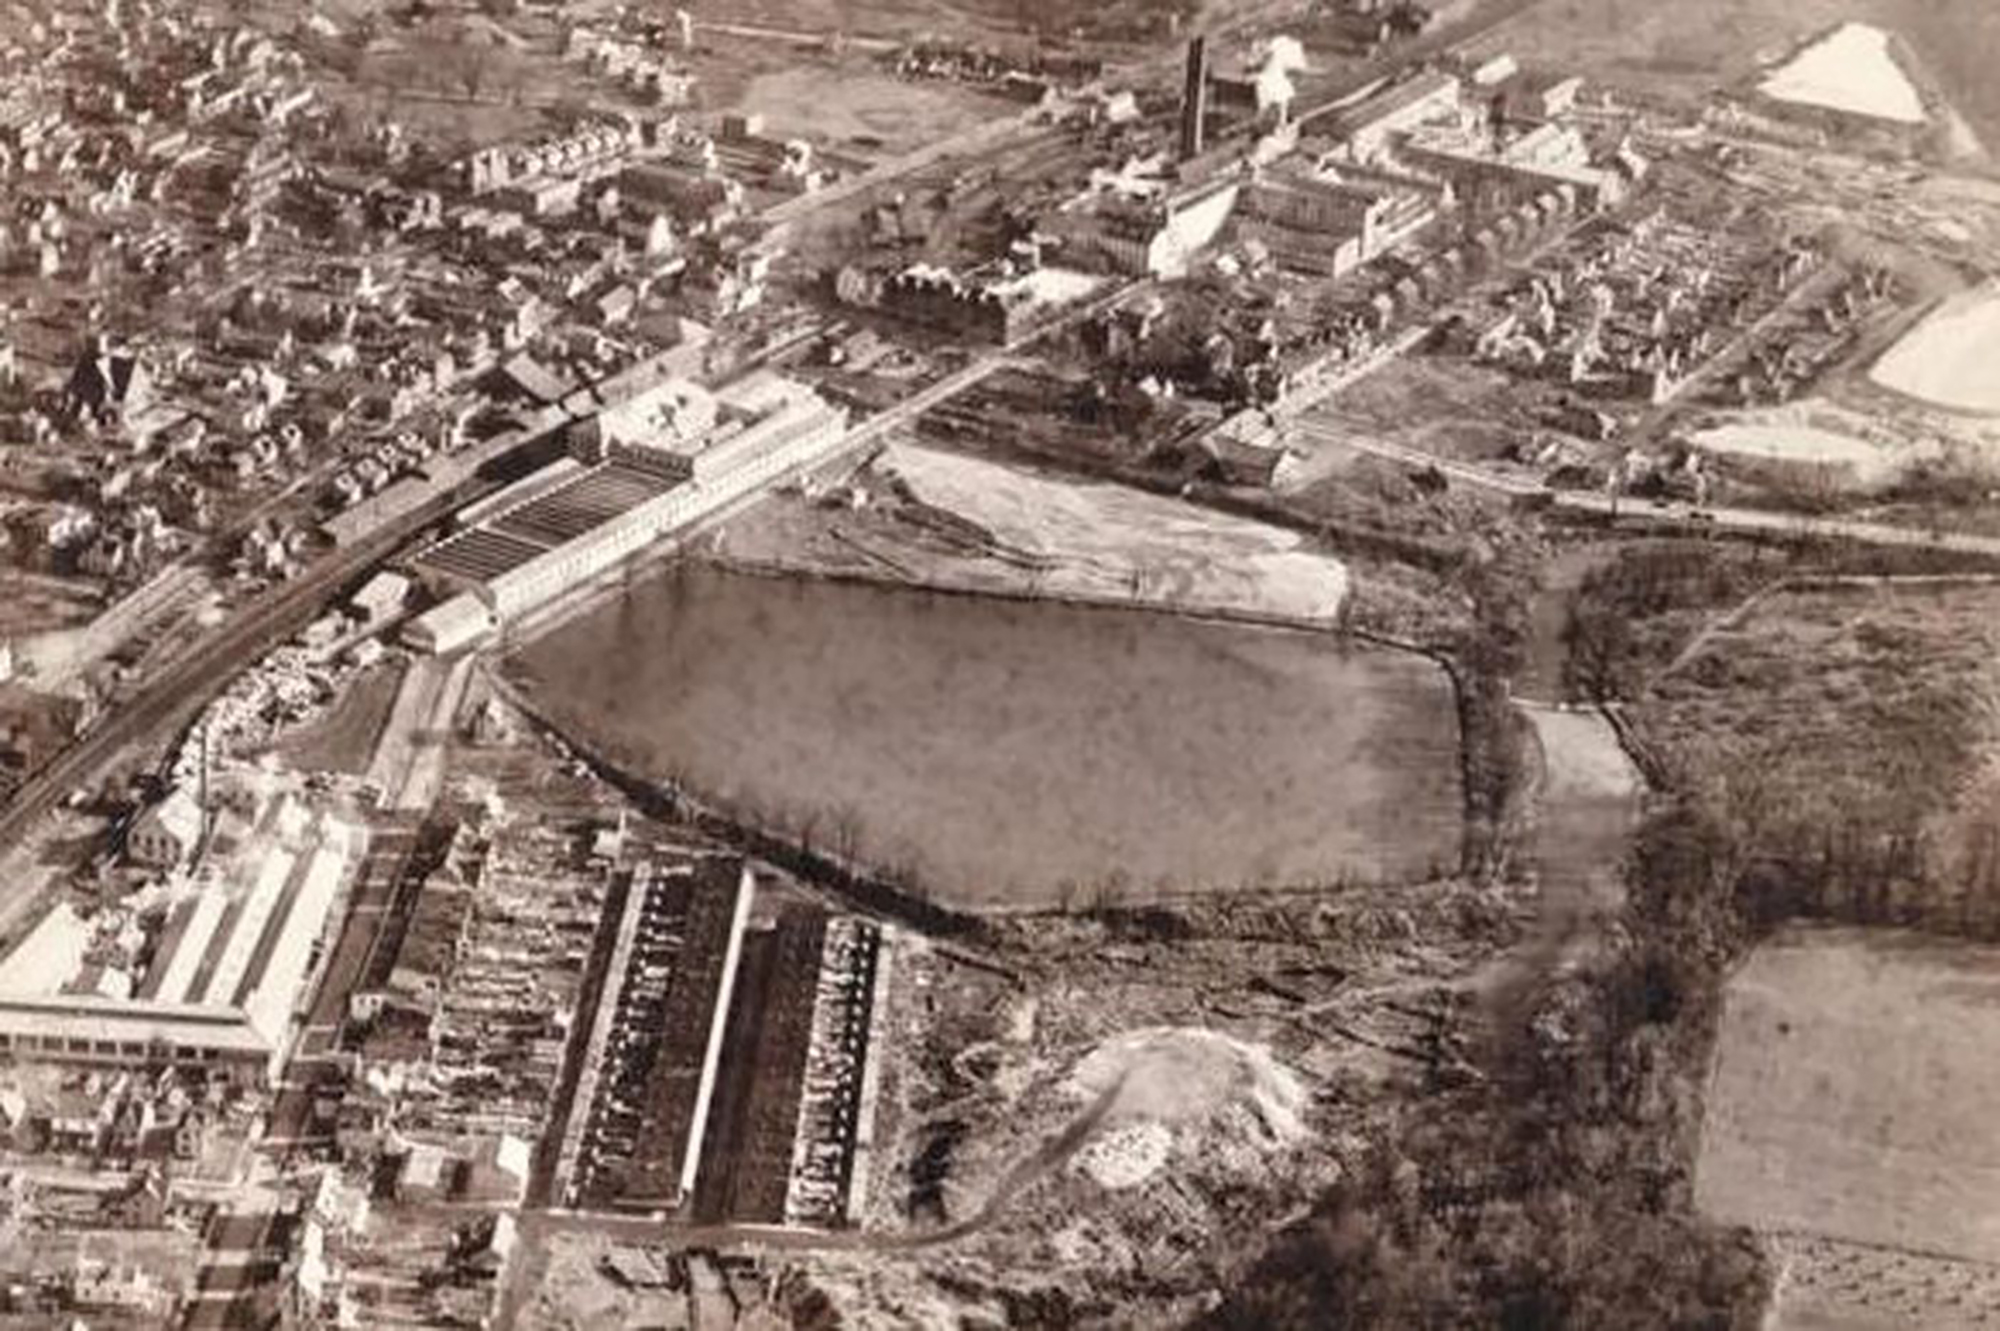 An aerial view of the former asbestos manufacturing site in Ambler, Pennsylvania.